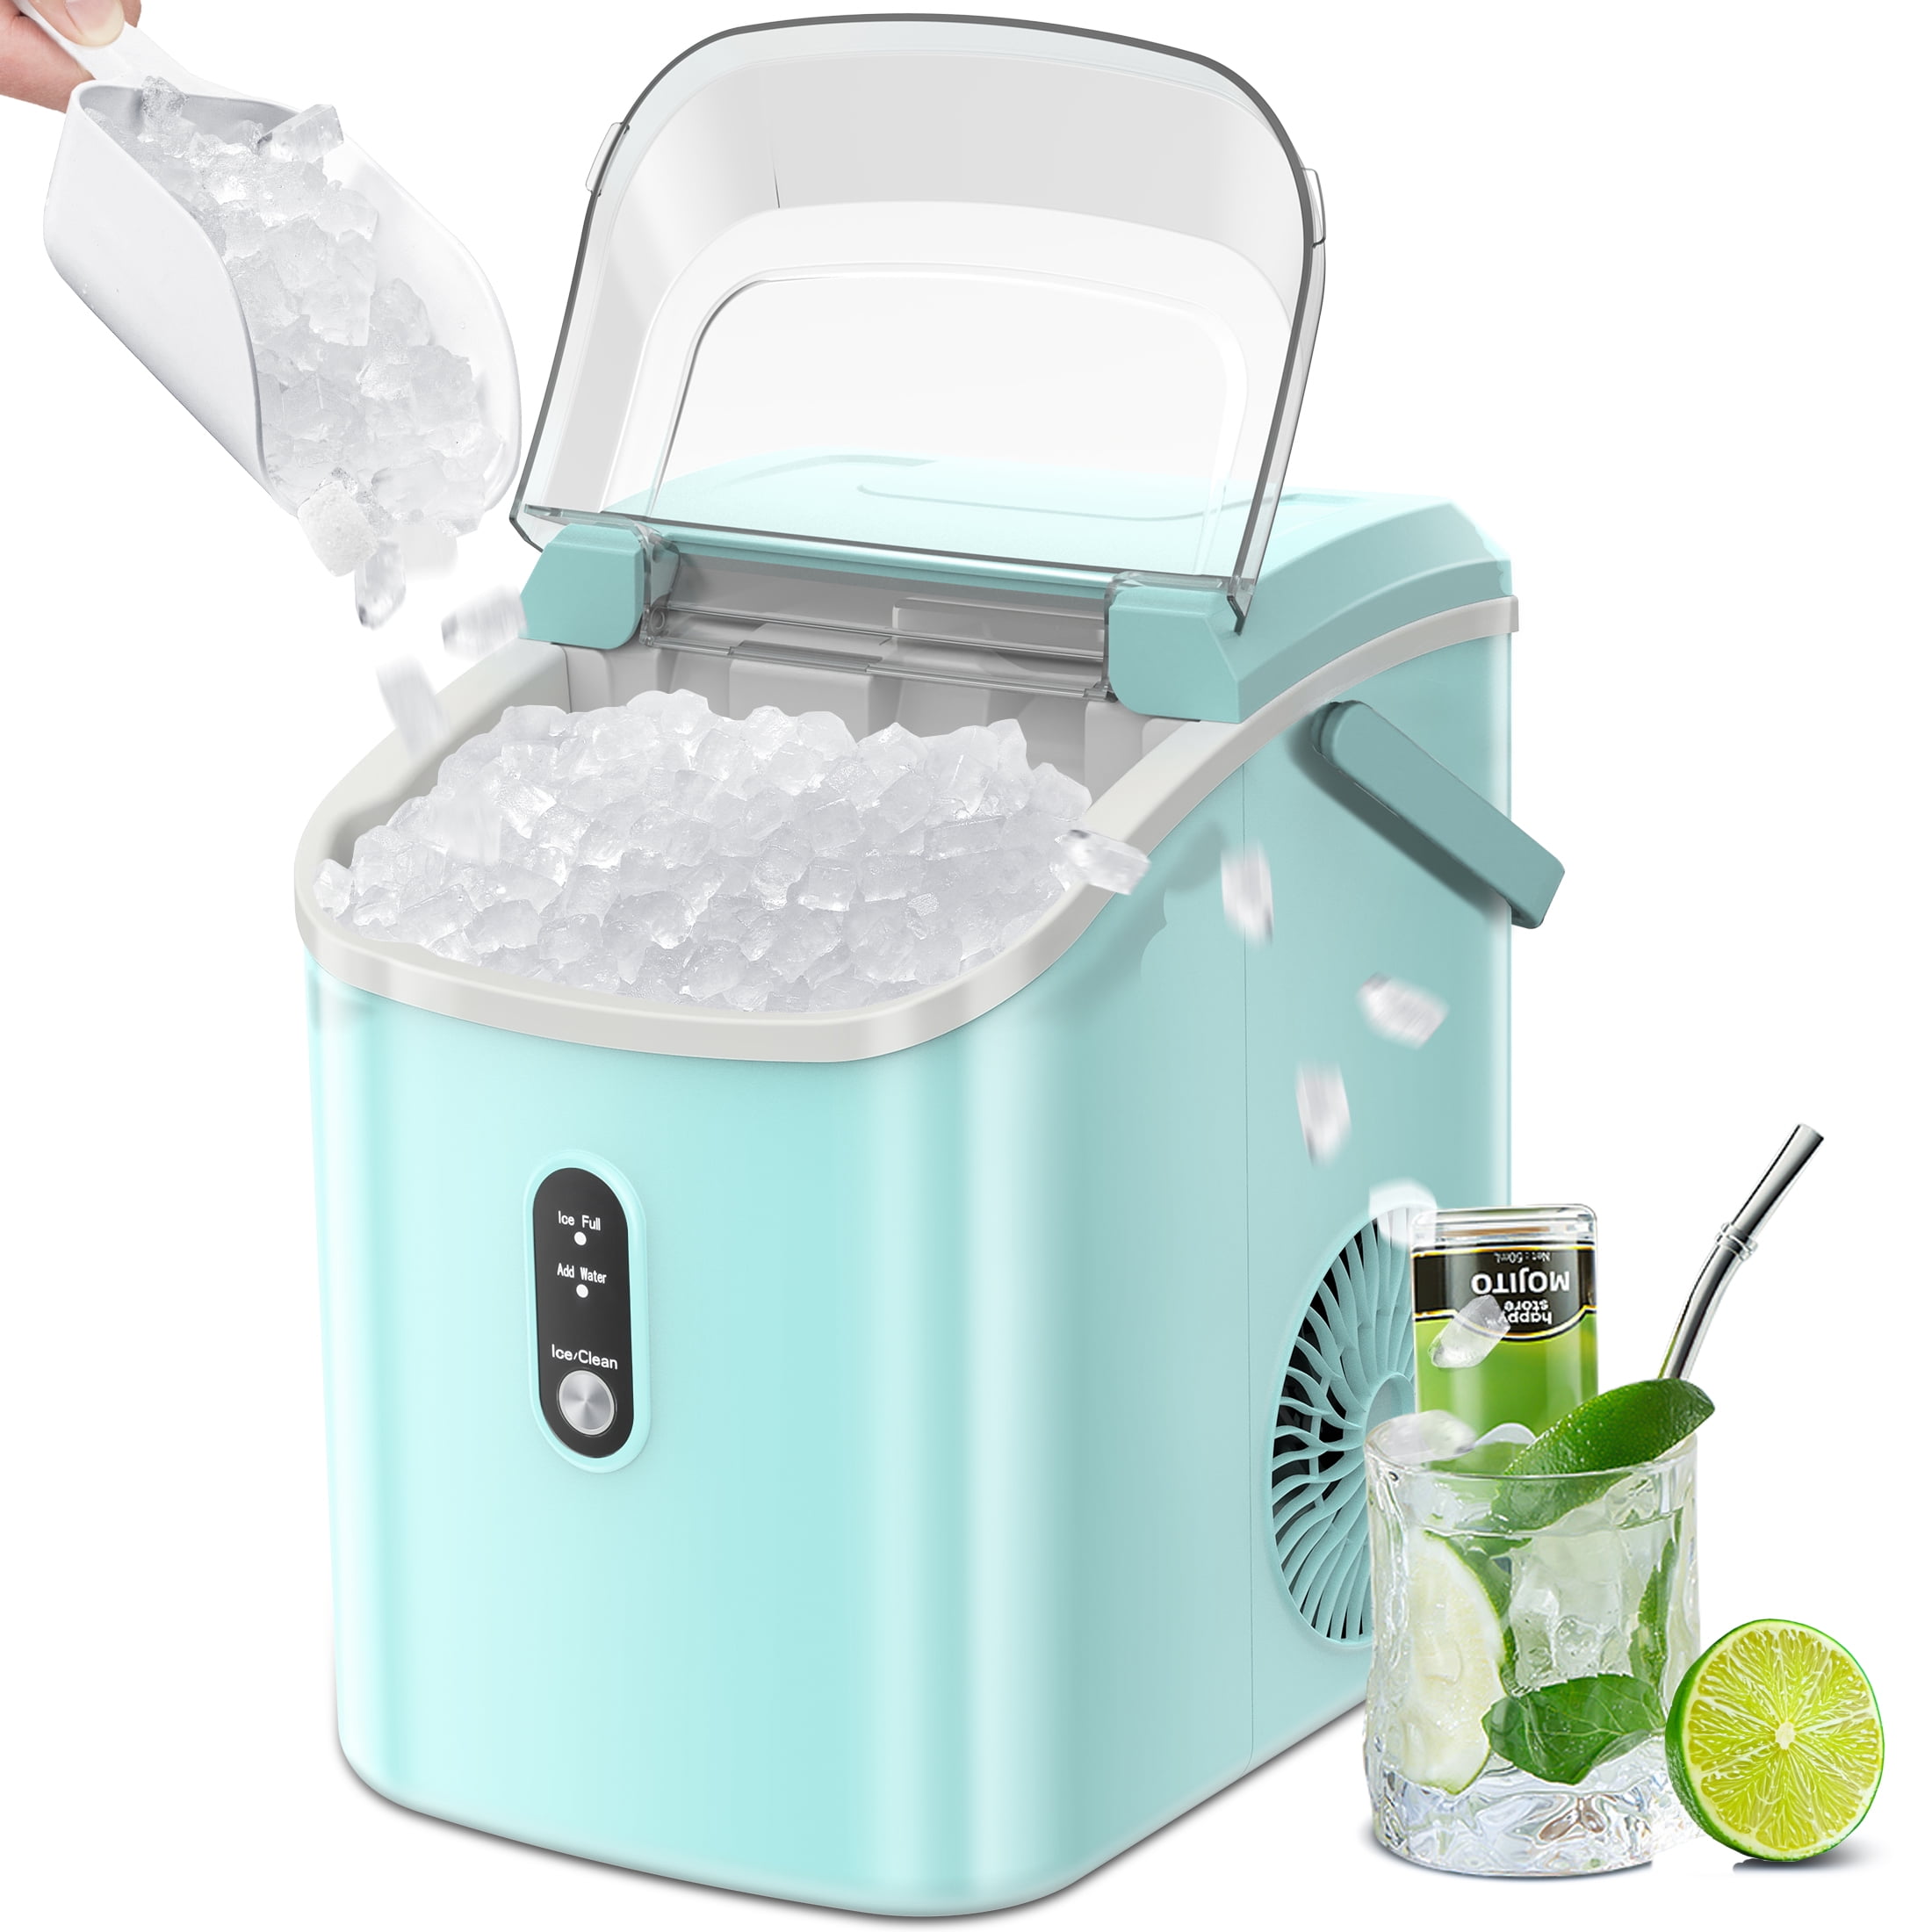 Litake Nugget Ice Maker Countertop with Soft Chewable Ice, Rapid Ice Making in 6-8min, 33lbs/24H, Auto-Cleaning,Food-Grade Internal Plastic,Water